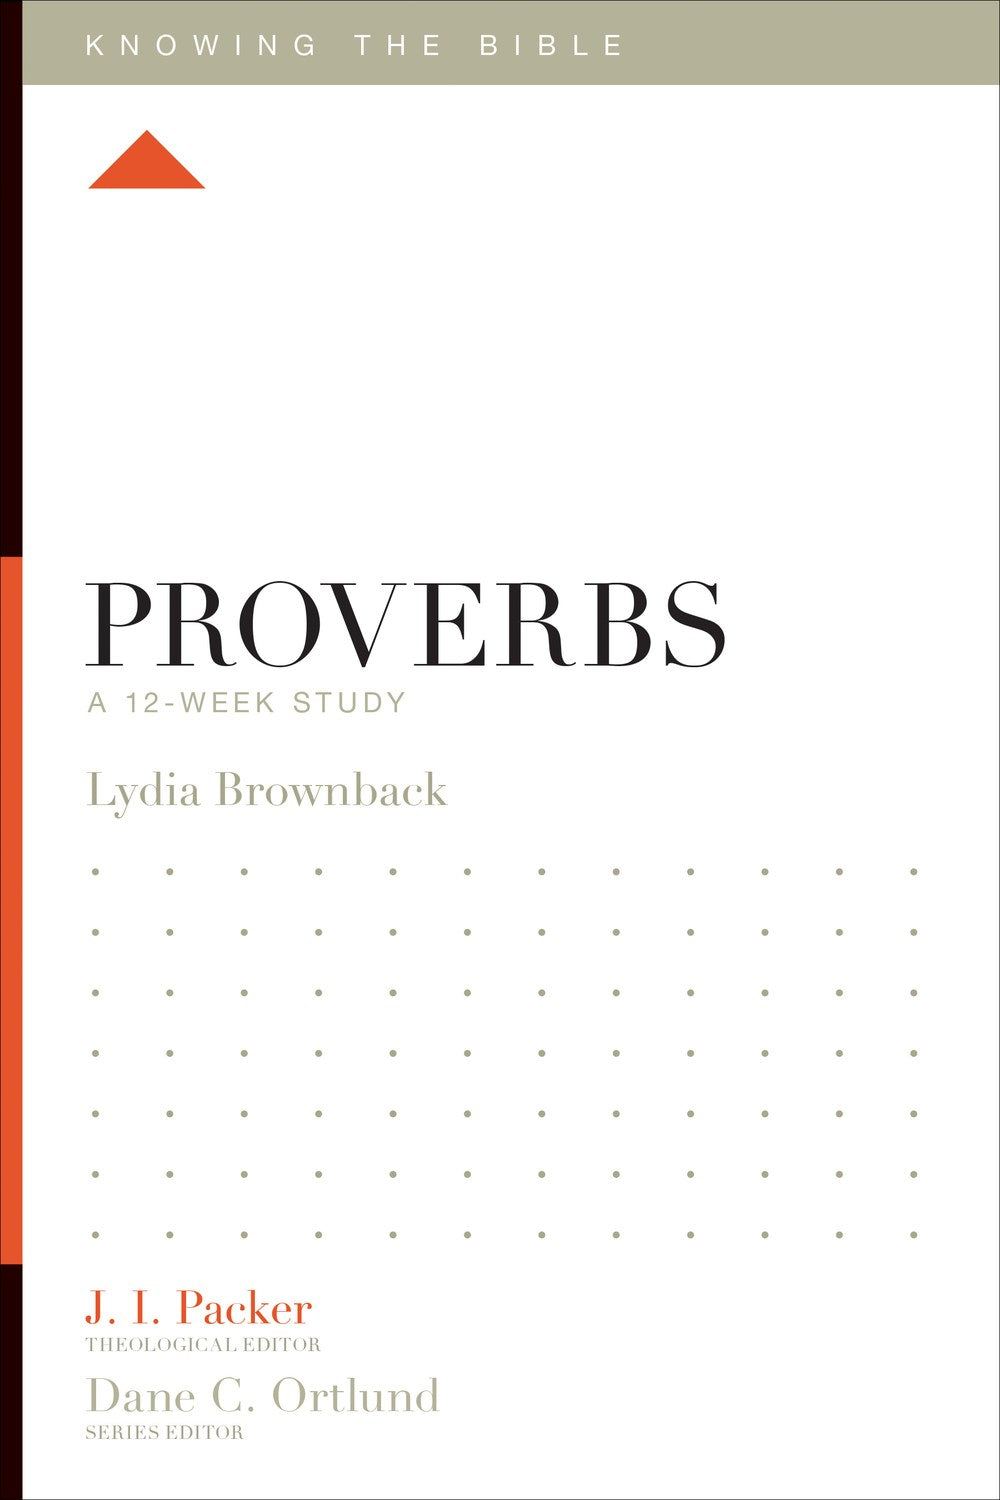 Proverbs: A 12-Week Study (Knowing The Bible)